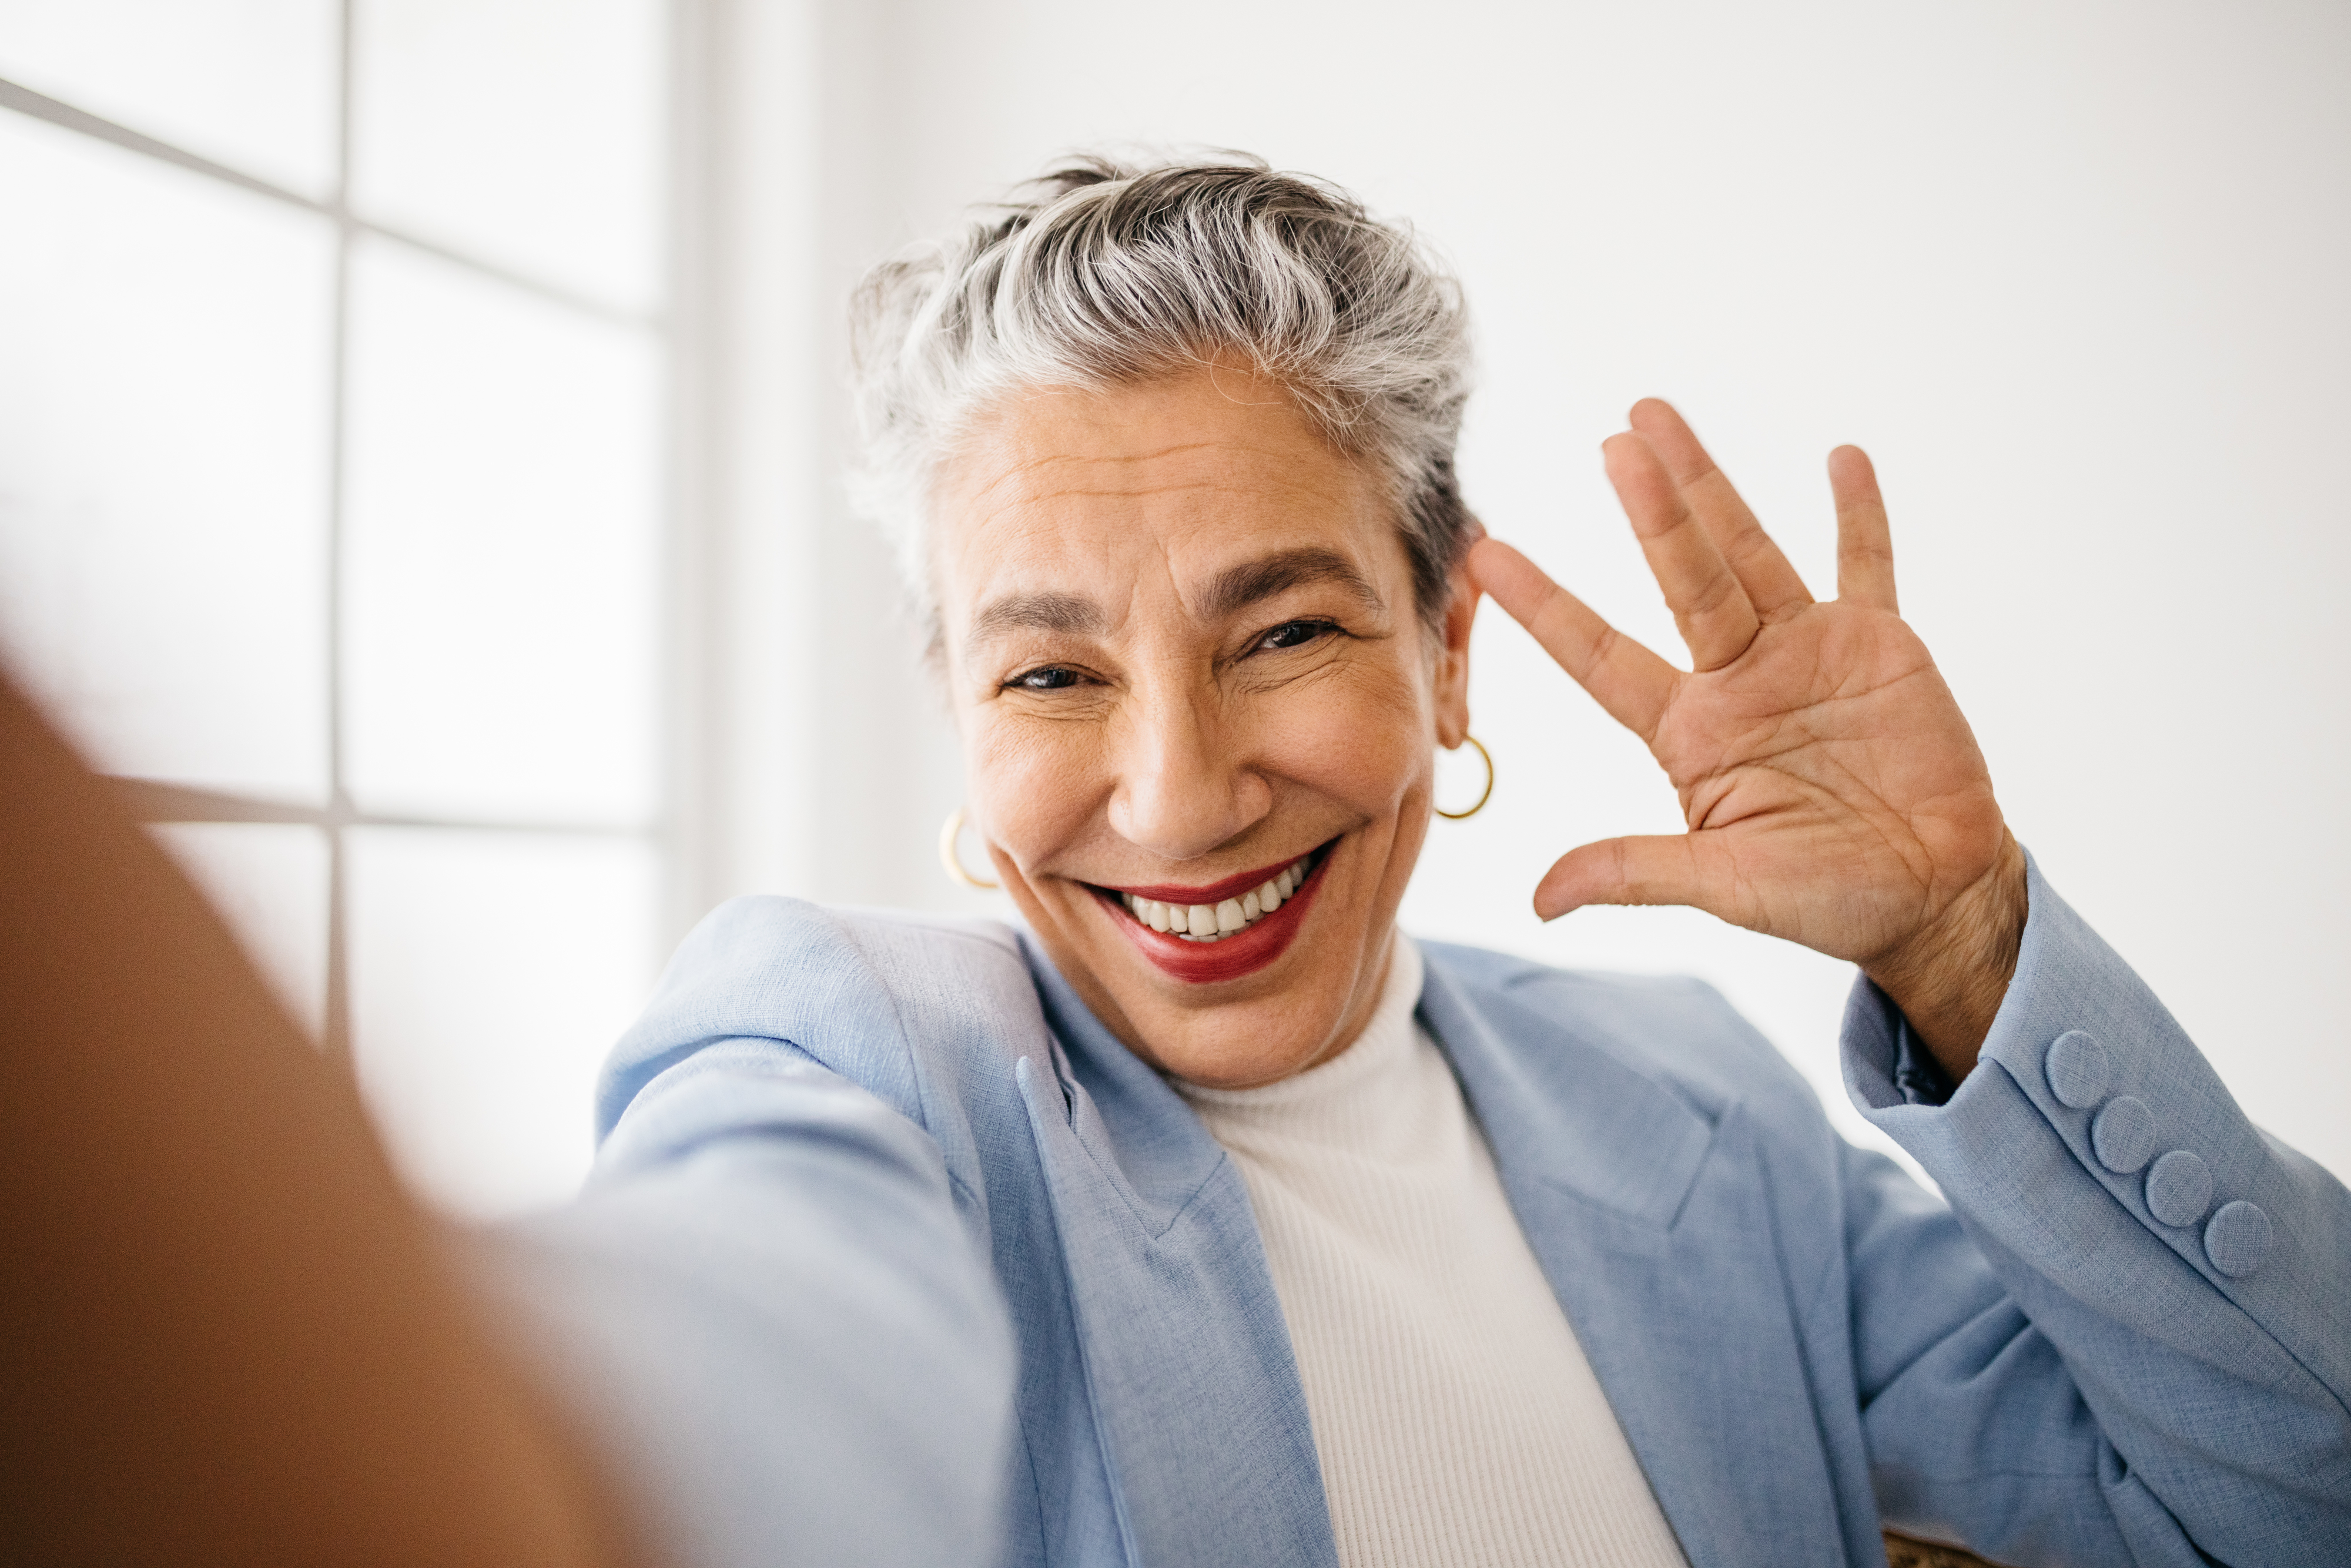 a woman with gray hair posing and smiling